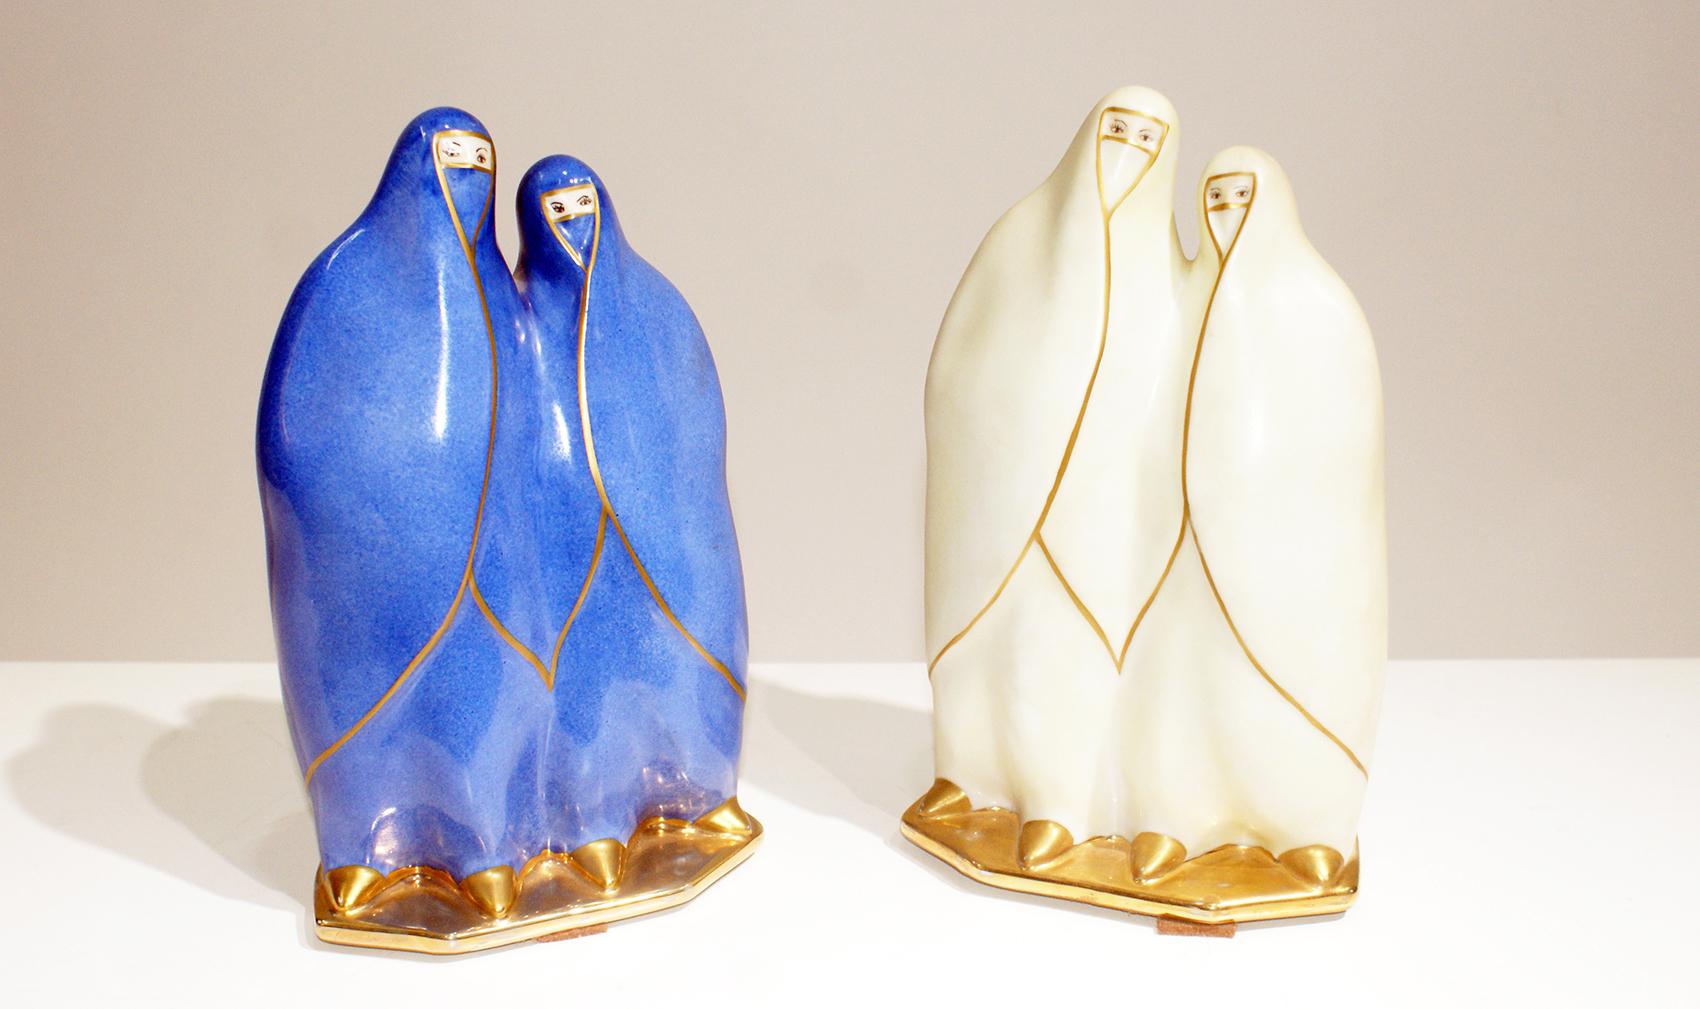 Pair of Art Deco French “Veilleuse”, or night light of Bedouin women in Porcelain. The first in blue color with gilt trim and the second in white color with gilt trim. Can be sold separately
Lovely when lights on. Signed on the reverse